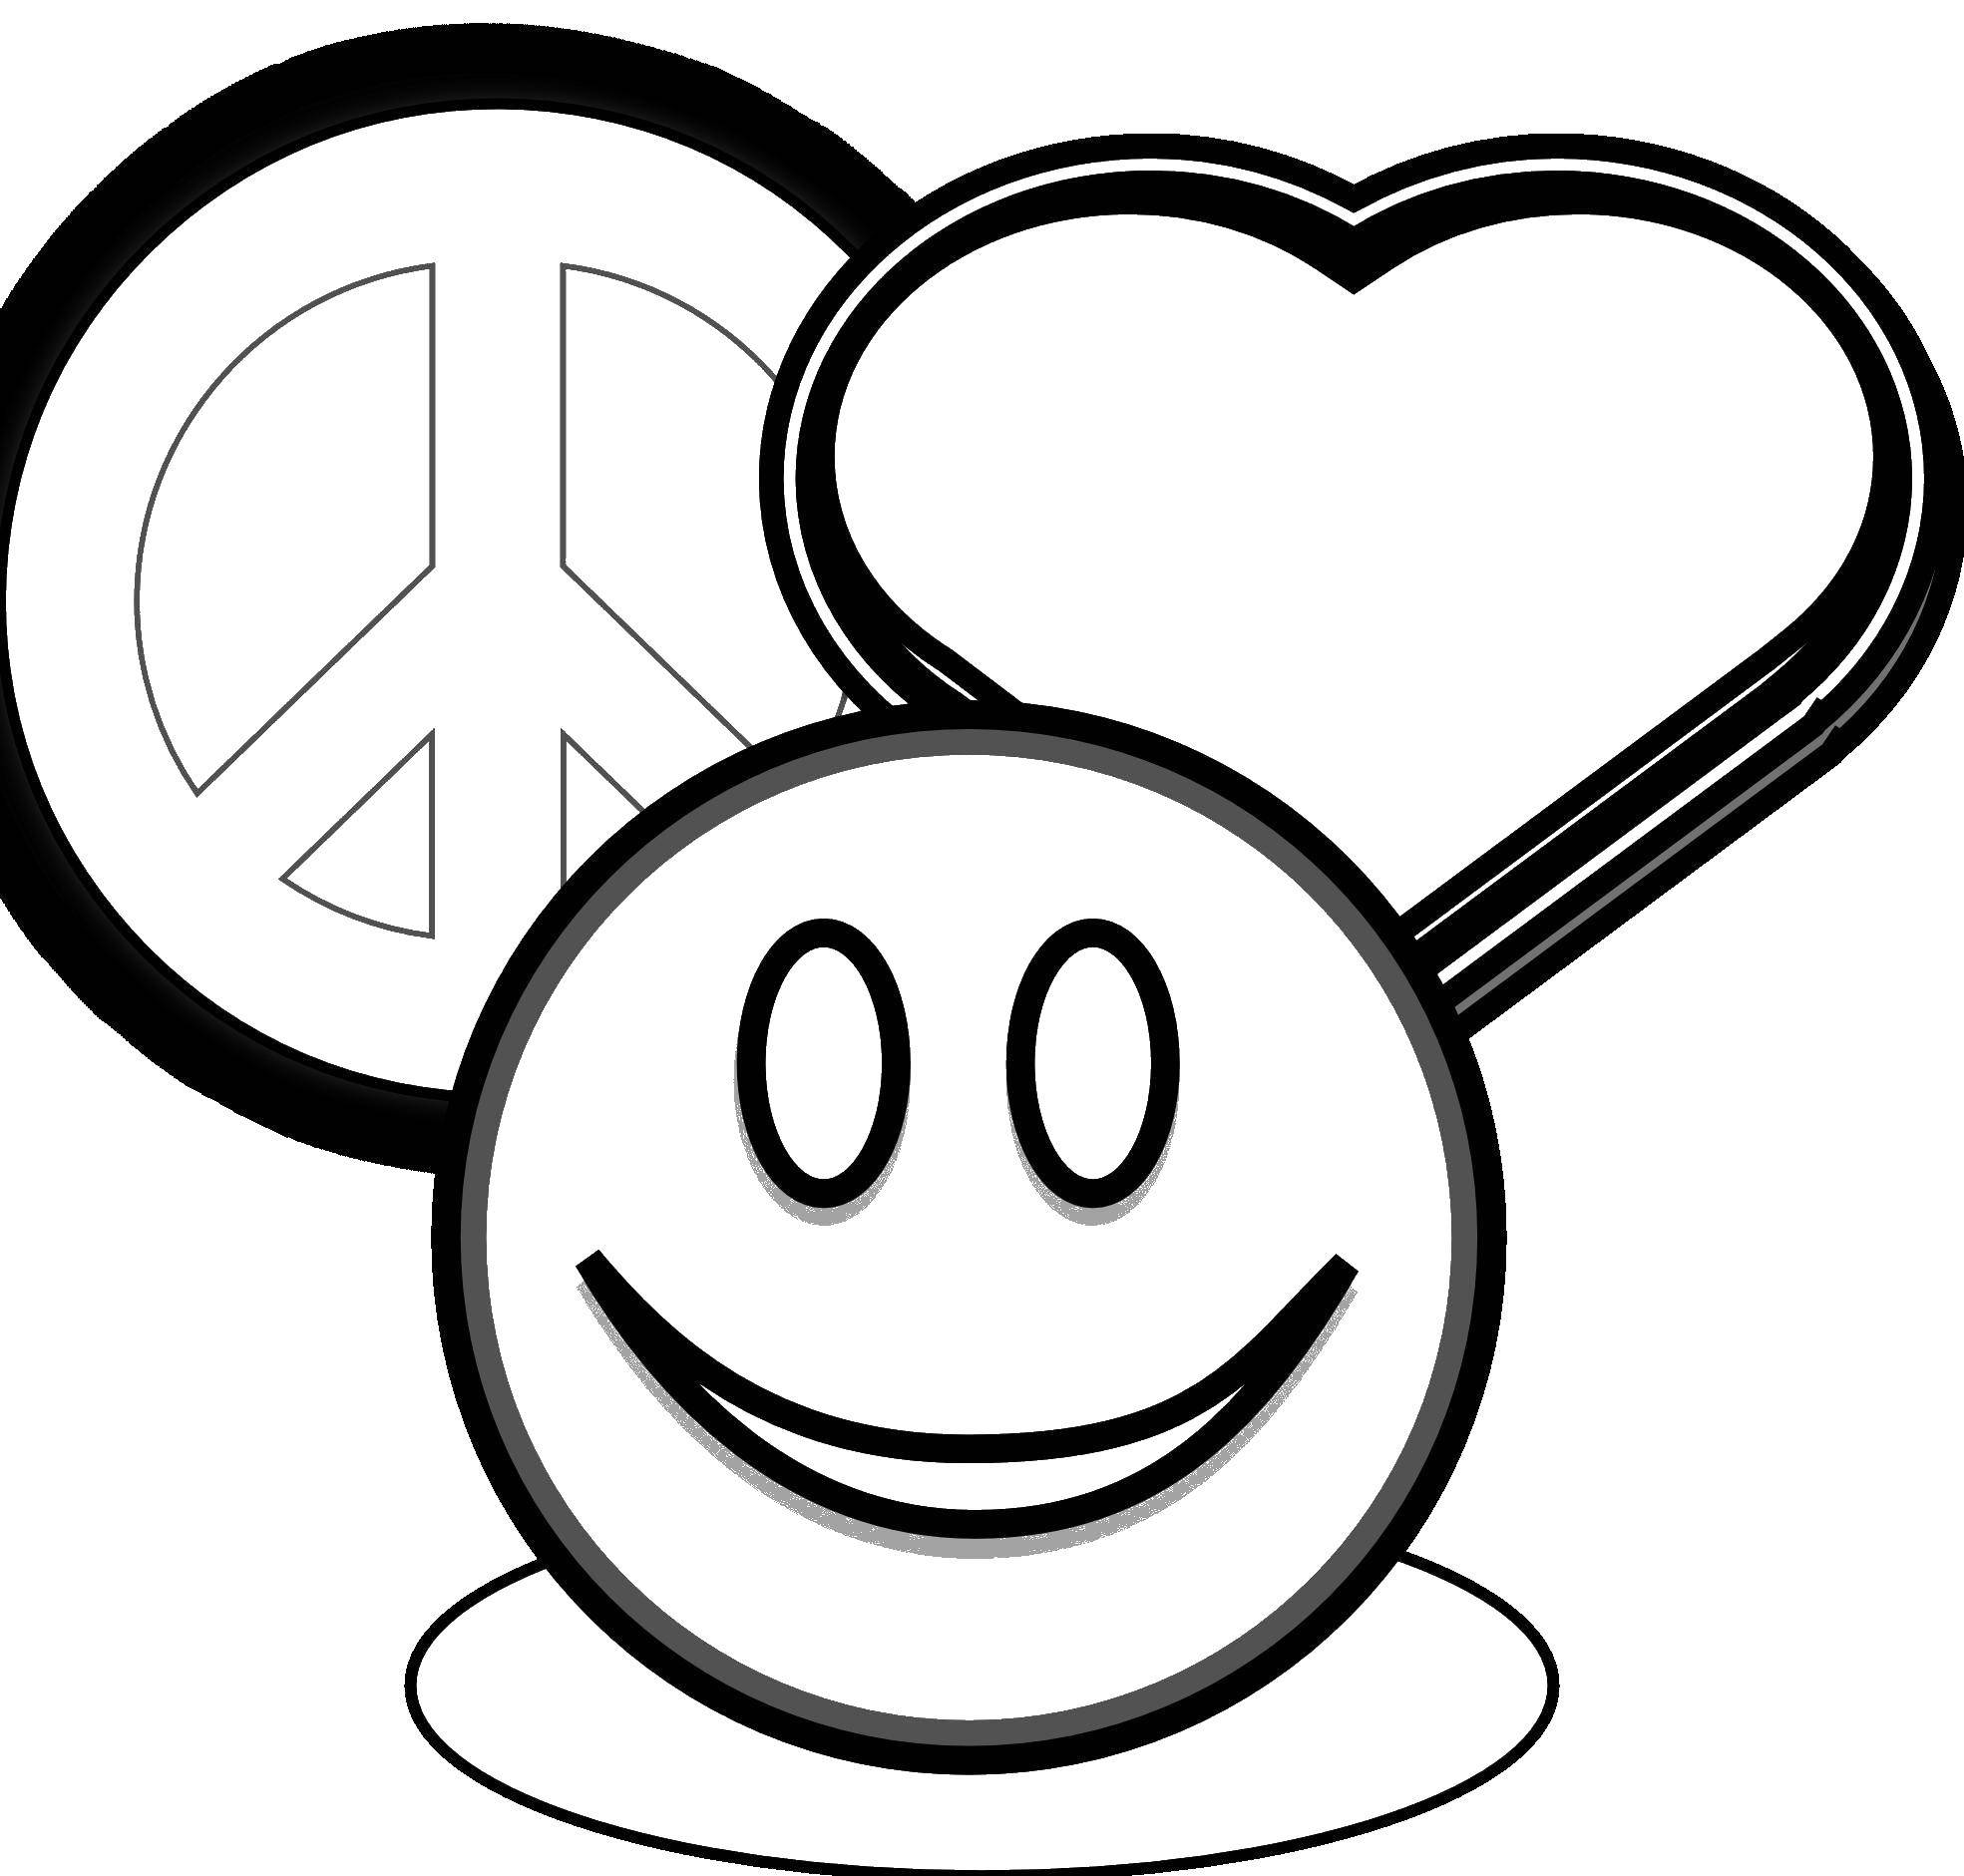 Coloring Sign hippie smile and heart. Category coloring. Tags:  Sign, smiley, heart.